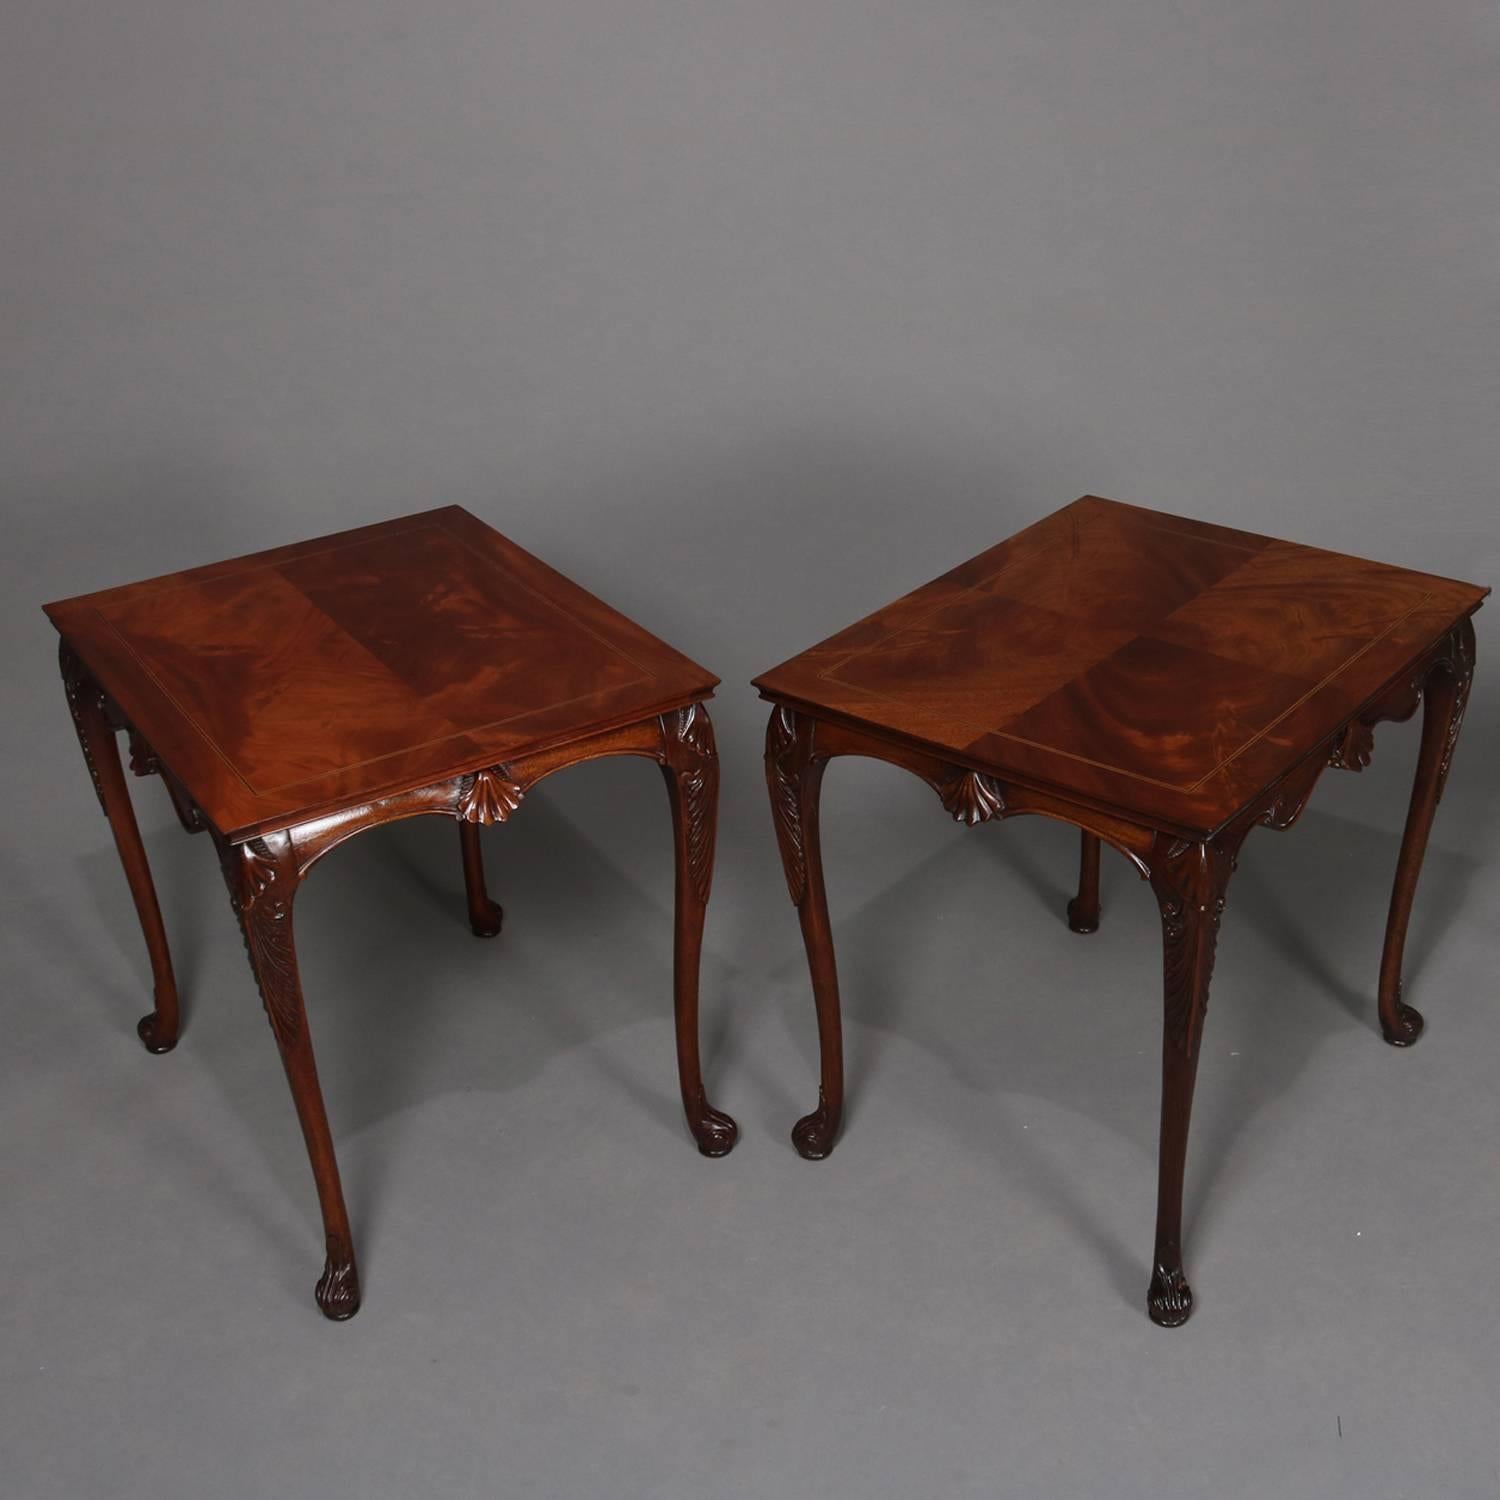 American Pair of Carved and Bookmatched Flame Mahogany Baker School End Tables circa 1930